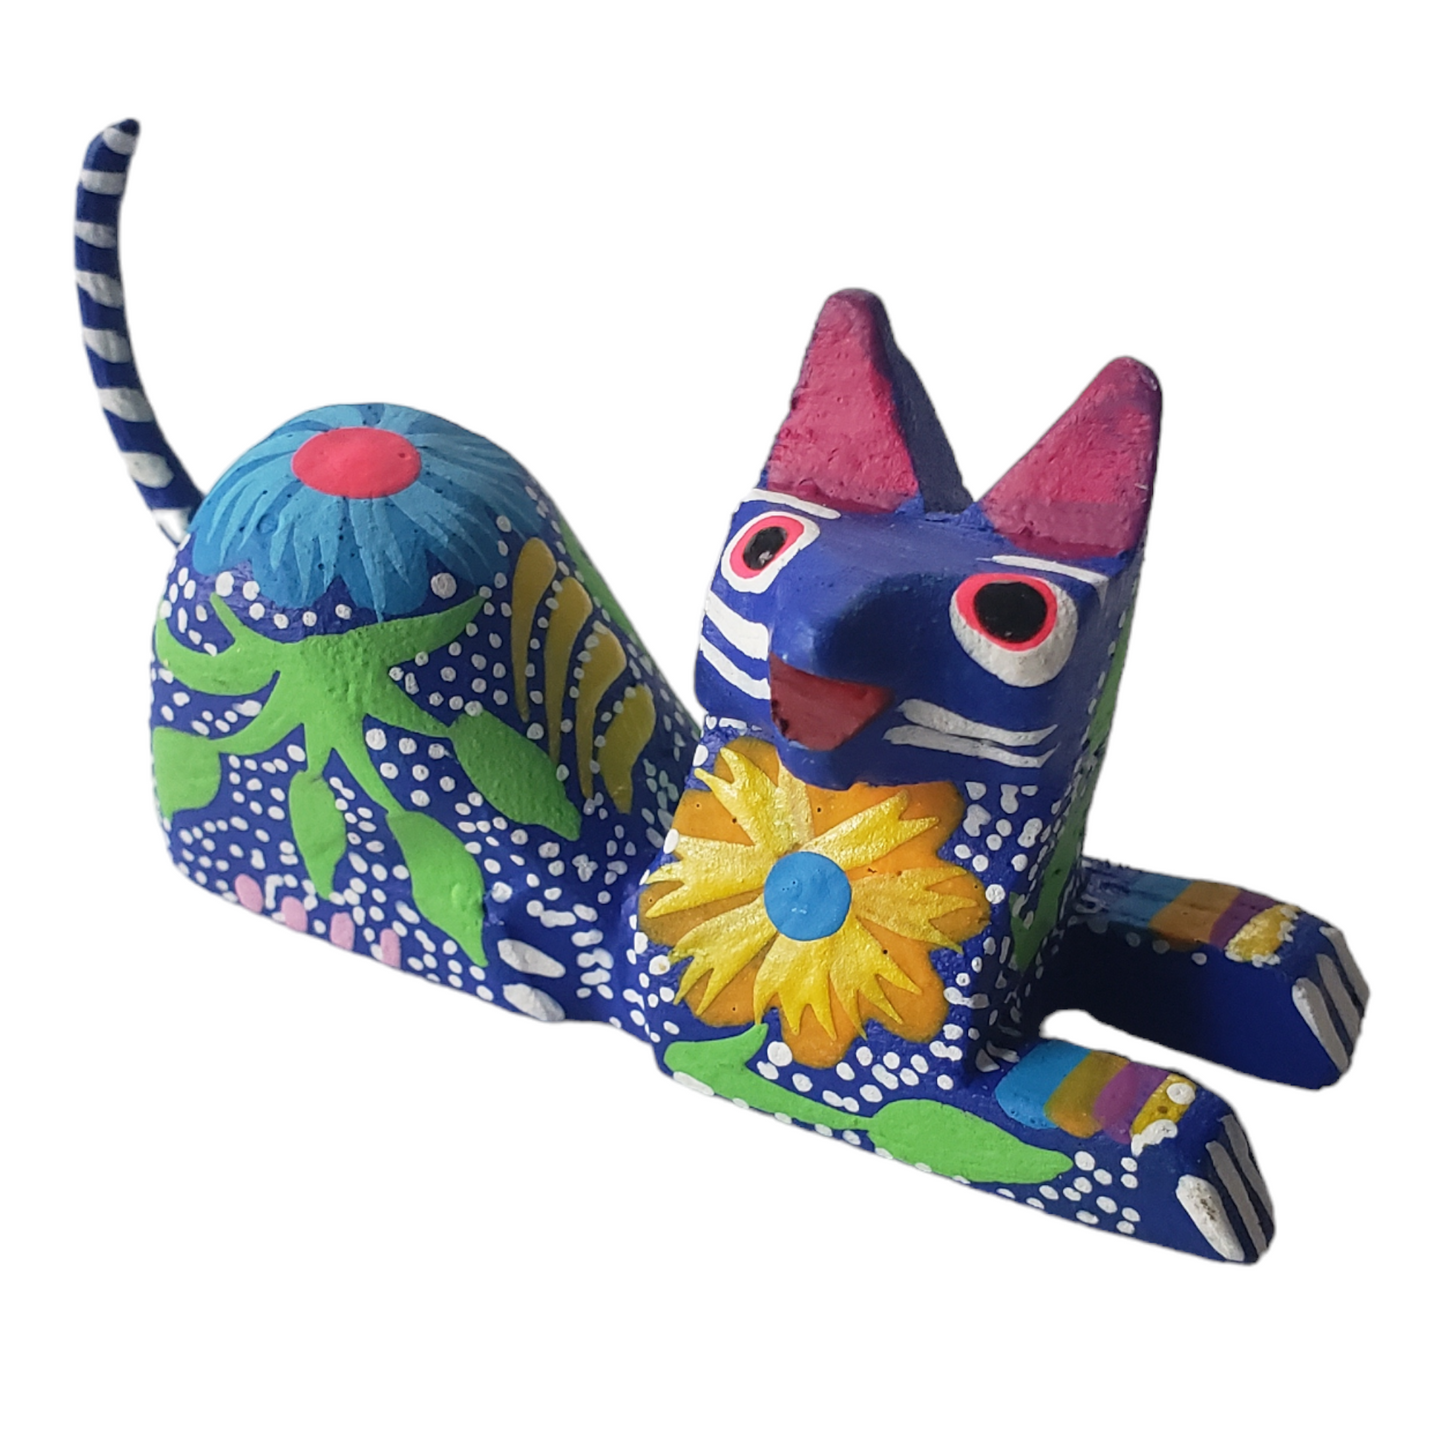 Oaxacan Alebrije Cat Mini Wood Carving Mexican Hand Painted